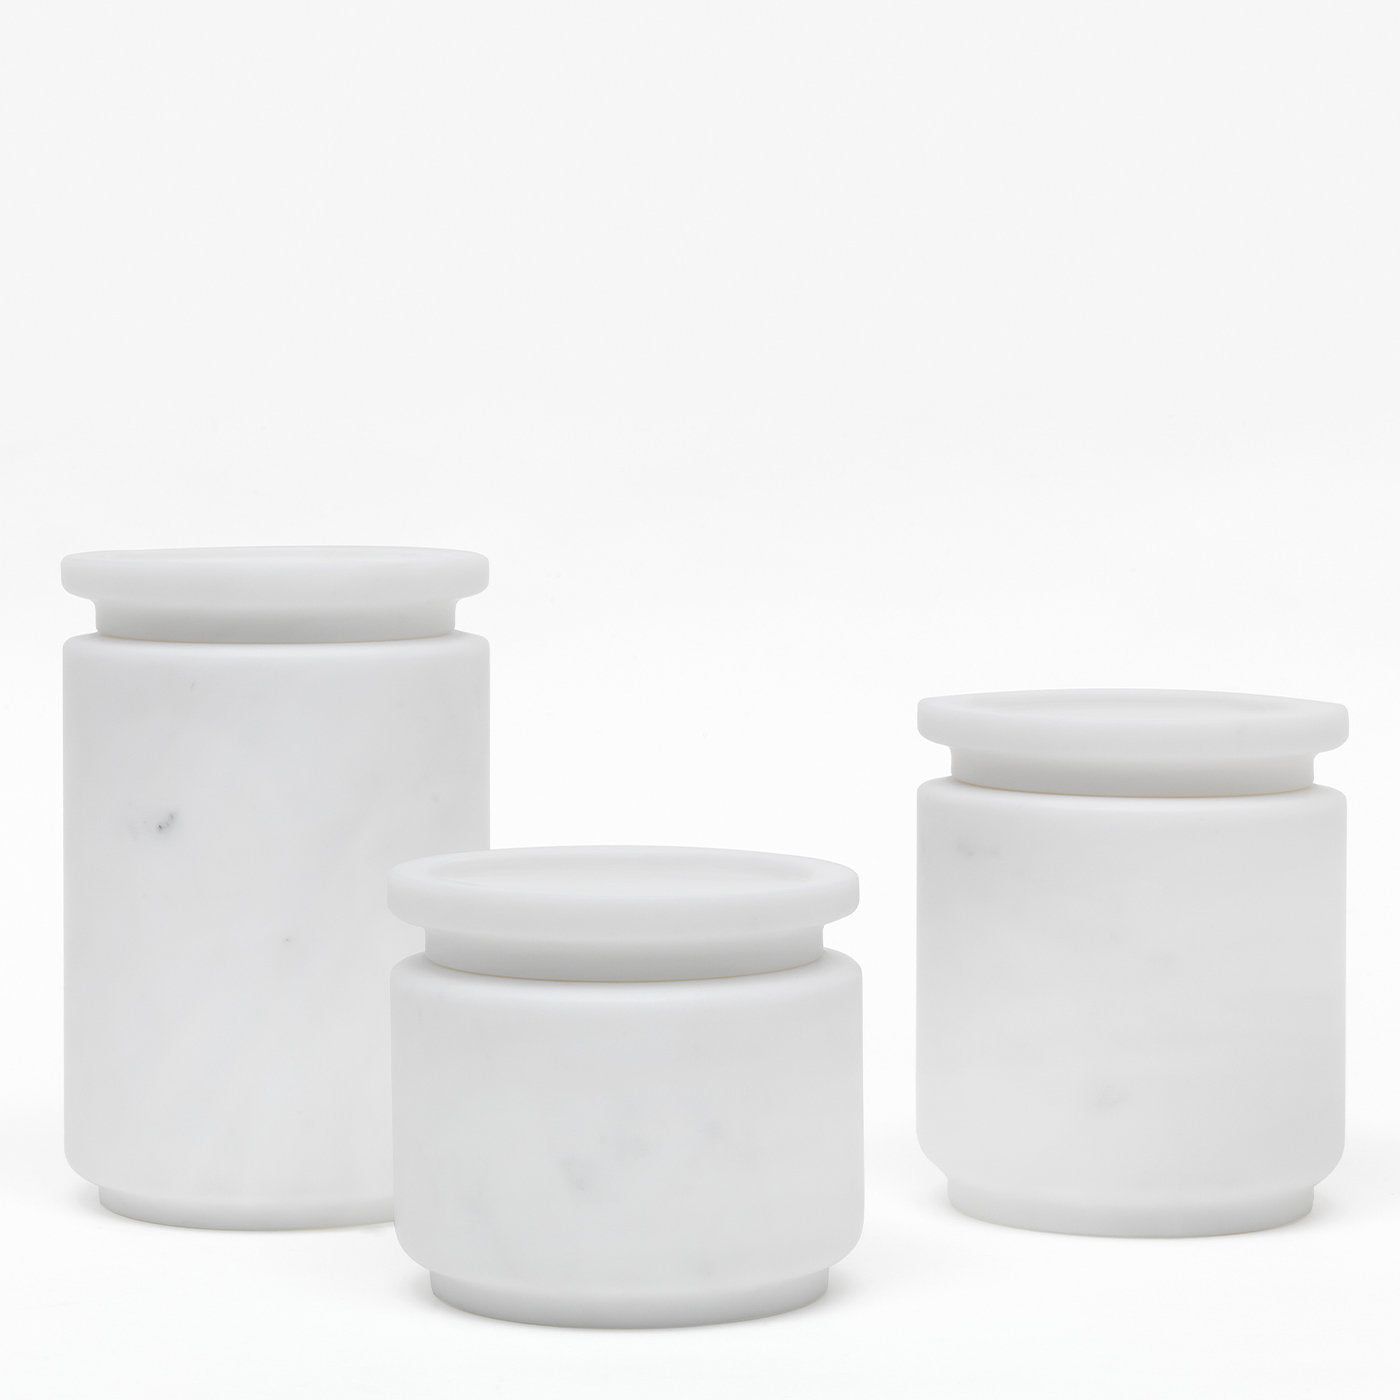 Pyxis Small White Michelangelo Jar by Ivan Colominas - Alternative view 1